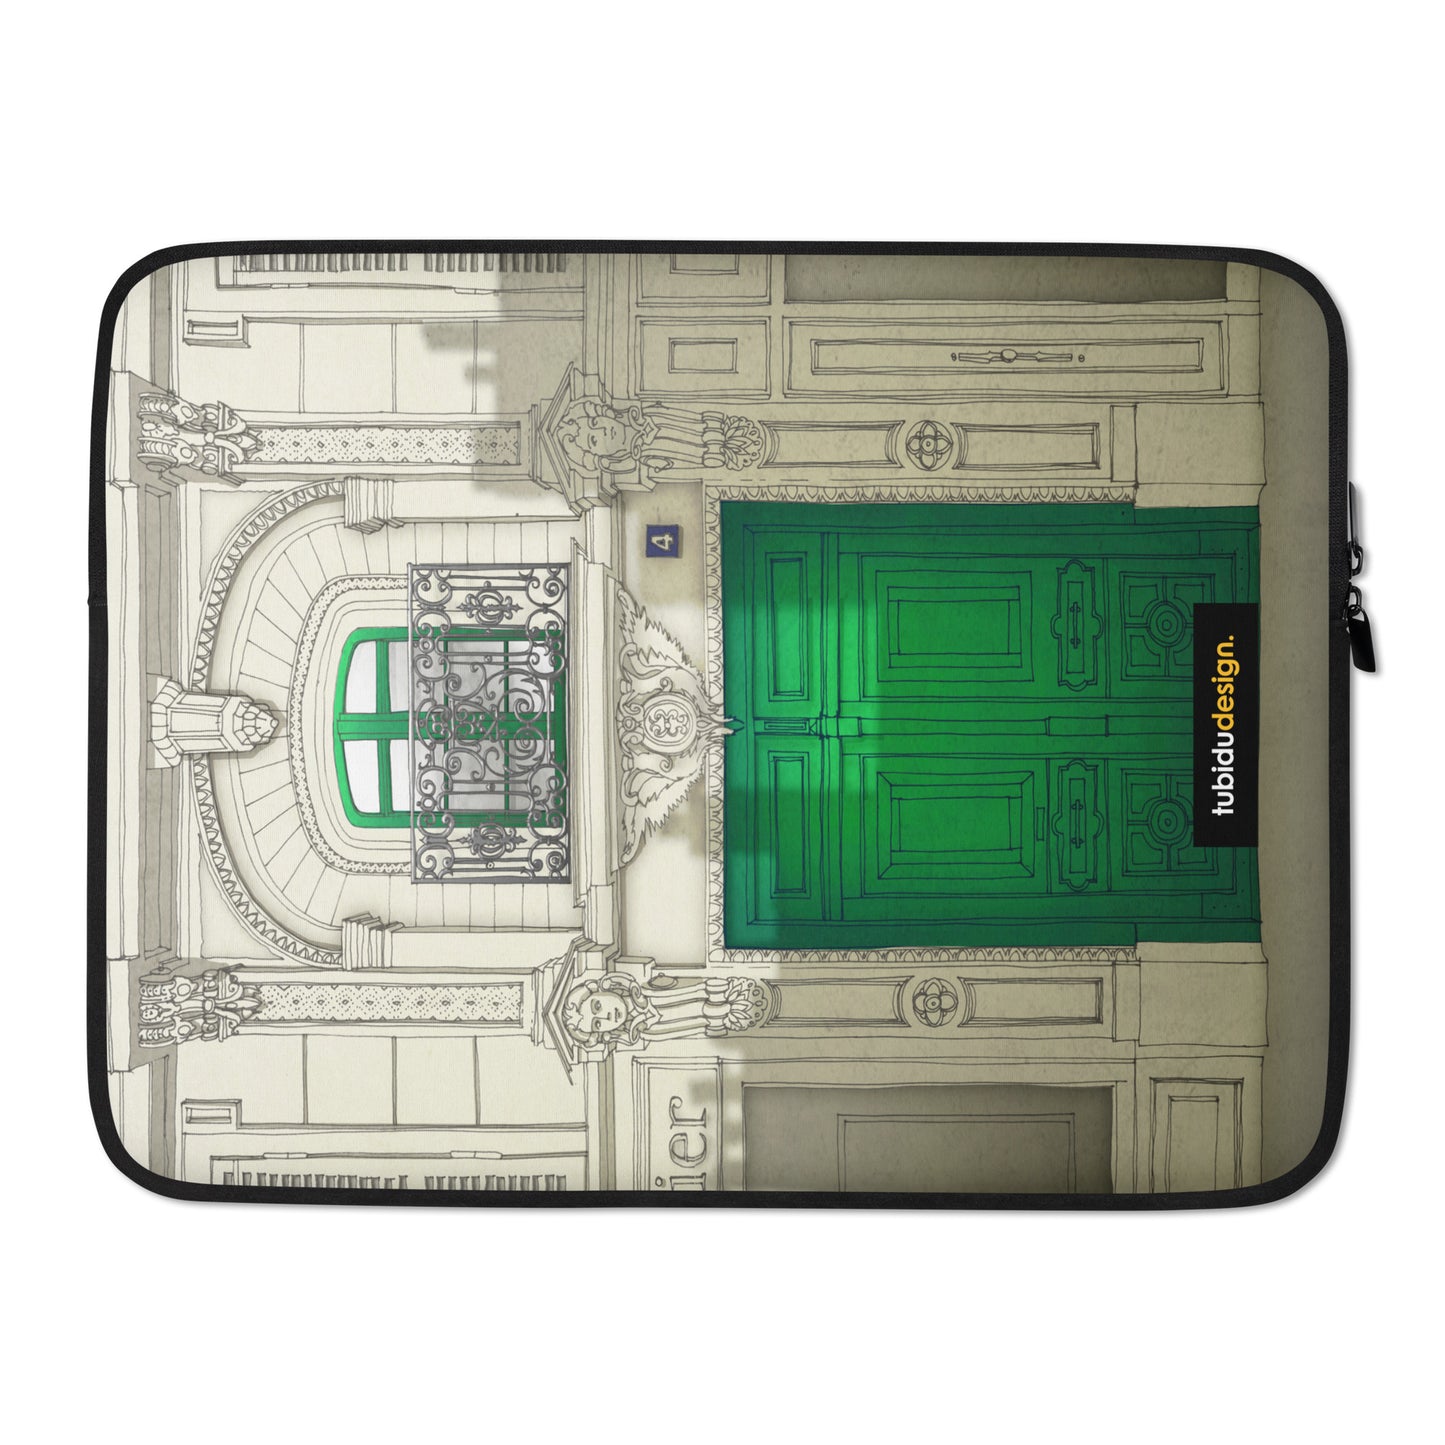 Fight for the light (green) - Illustrated Laptop Sleeve